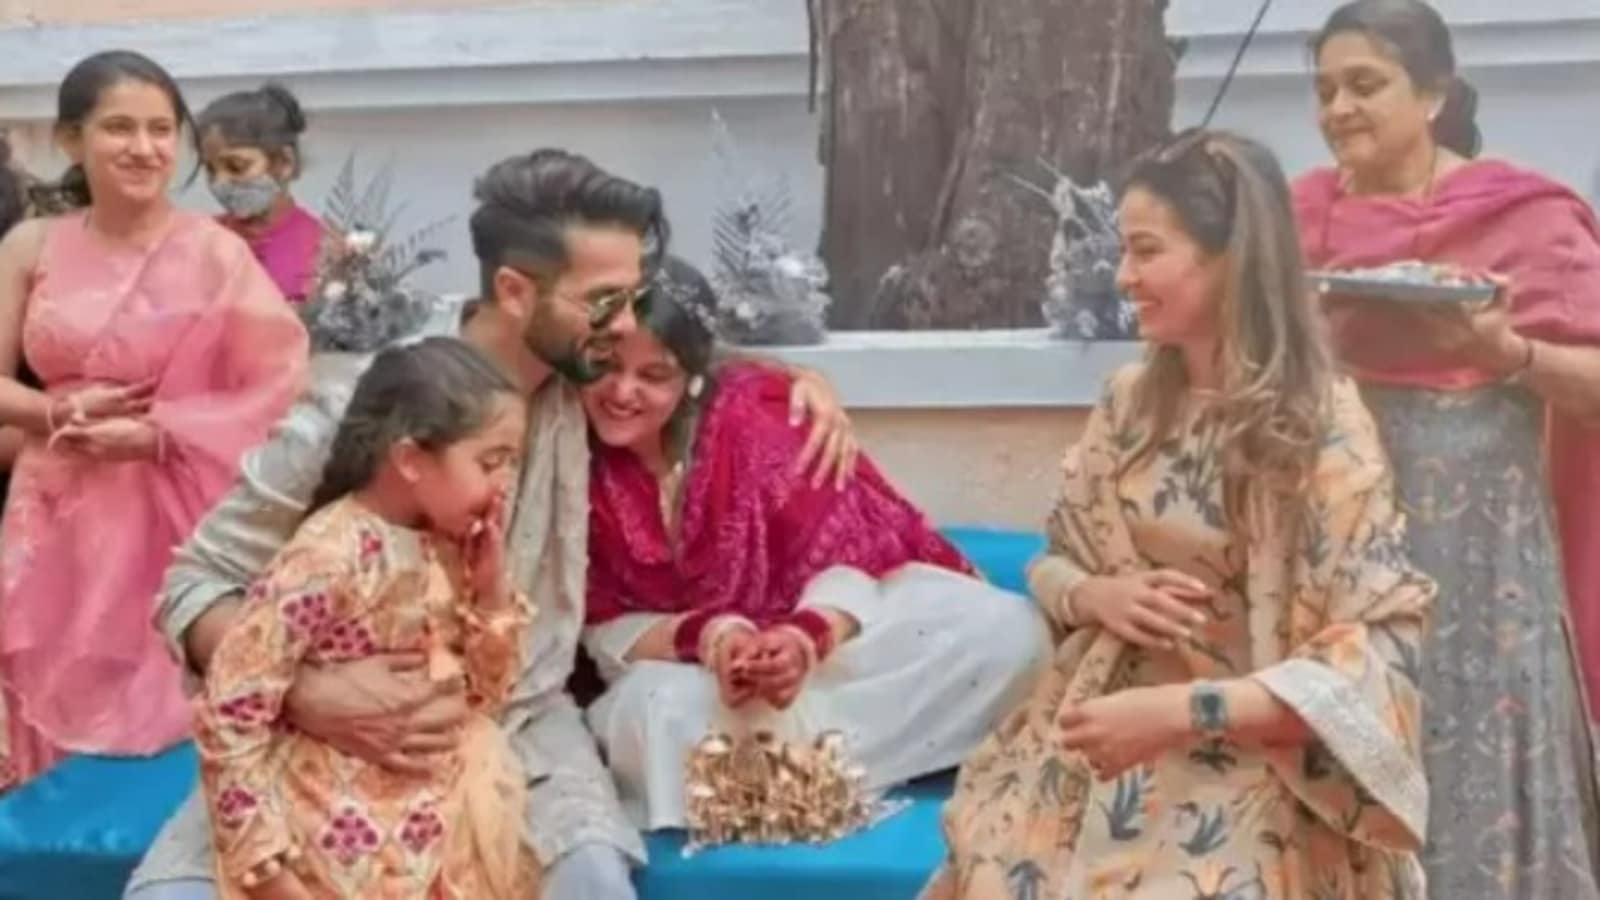 Shahid Kapoor observed daughter Misha as she ‘patiently’ got mehendi done, Mira Rajput got his name inked on her hand